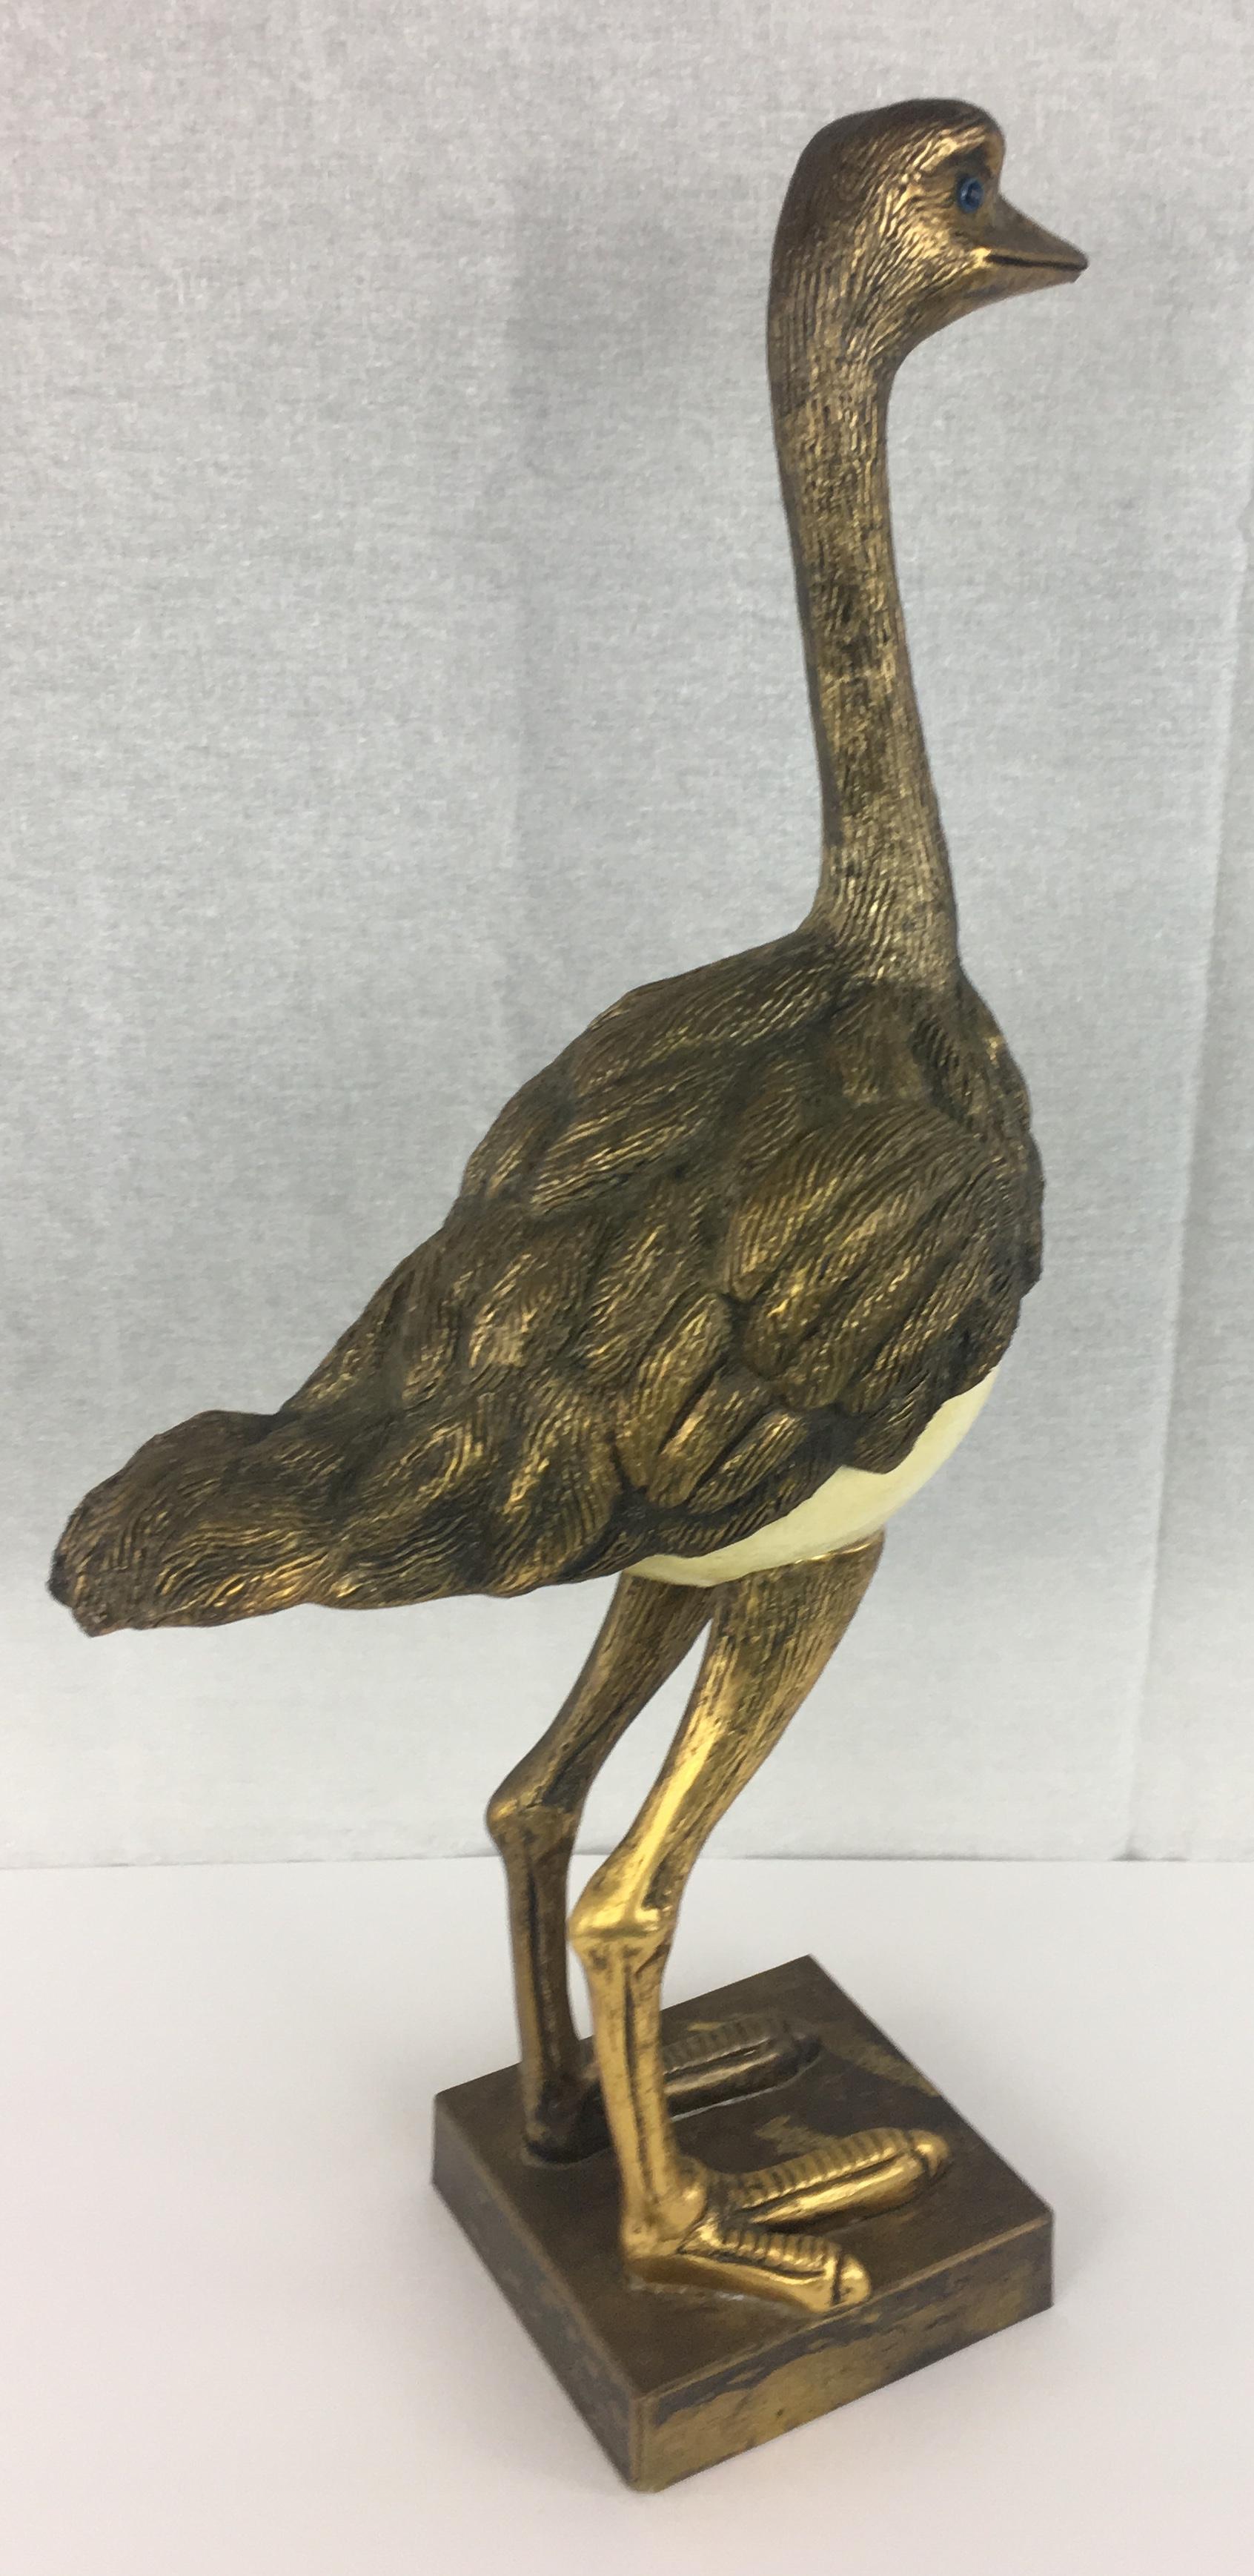 Very decorative Midcentury modern tall sculpture center made with the body of ostrich egg. Legs, feet, feathered details and head is gold plated metal with glass eyes sculpture rests on a brass base. The details of the sculpted feathers are